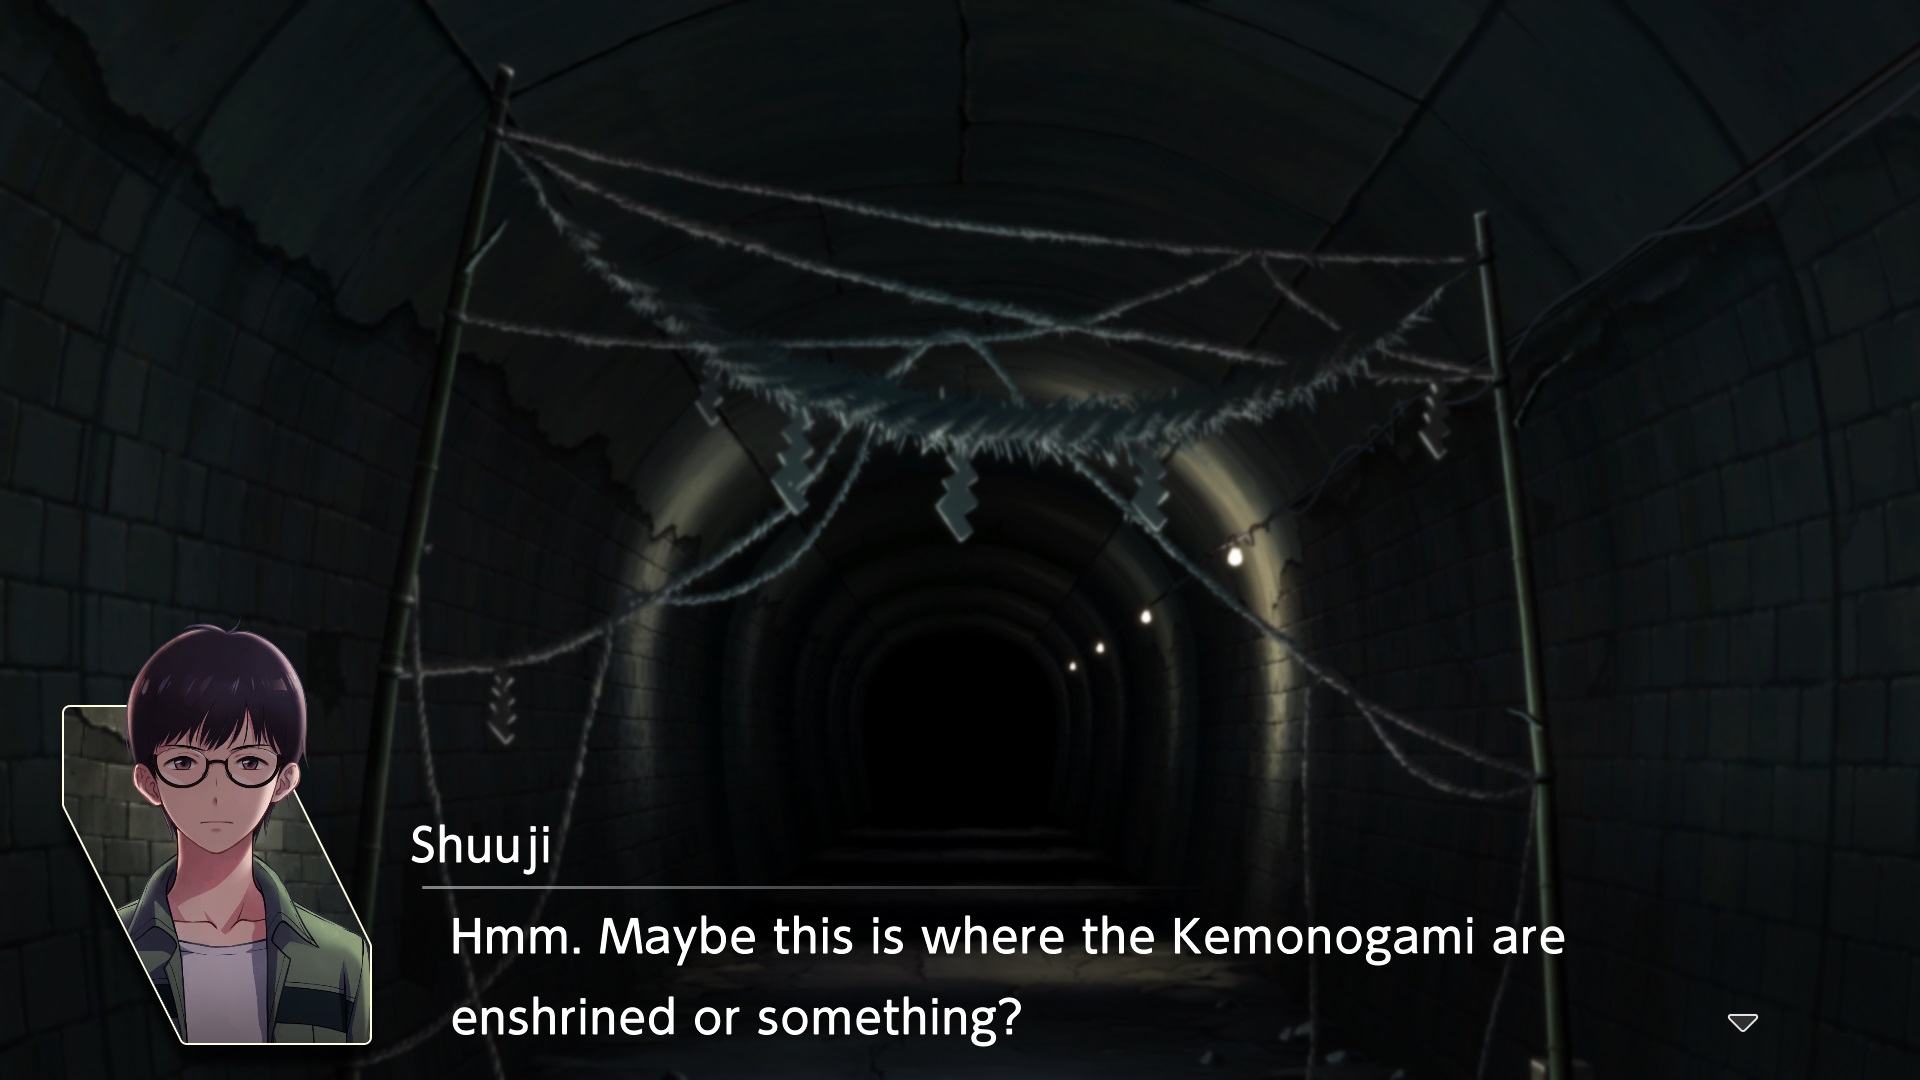 Digimon Survive’s haunting visuals inspire the imagination in unsettling ways